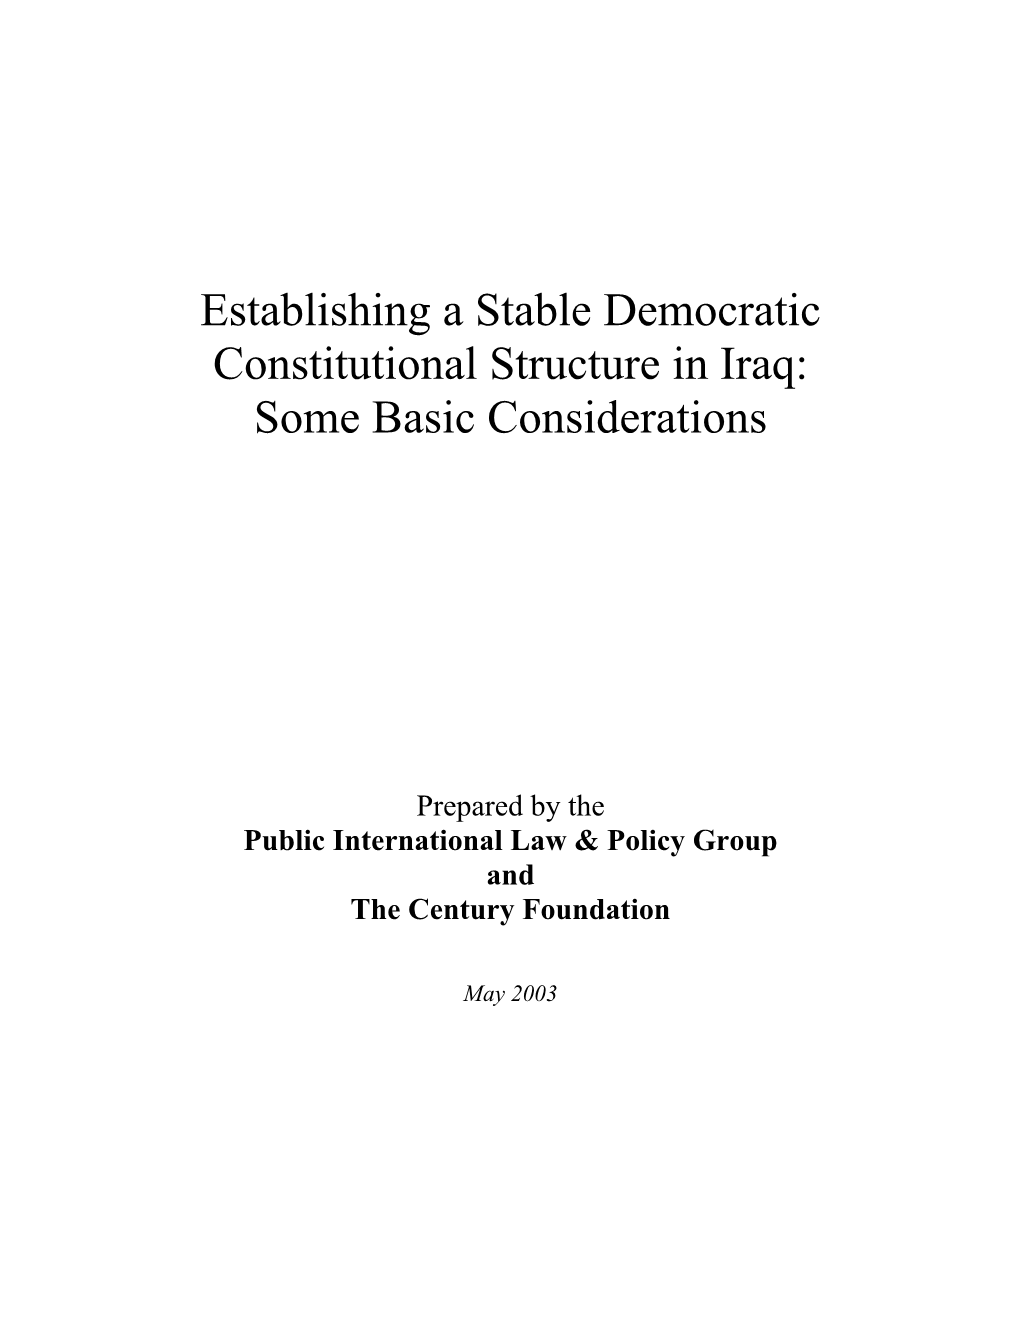 Establishing a Stable Democratic Constitutional Structure in Iraq: Some Basic Considerations